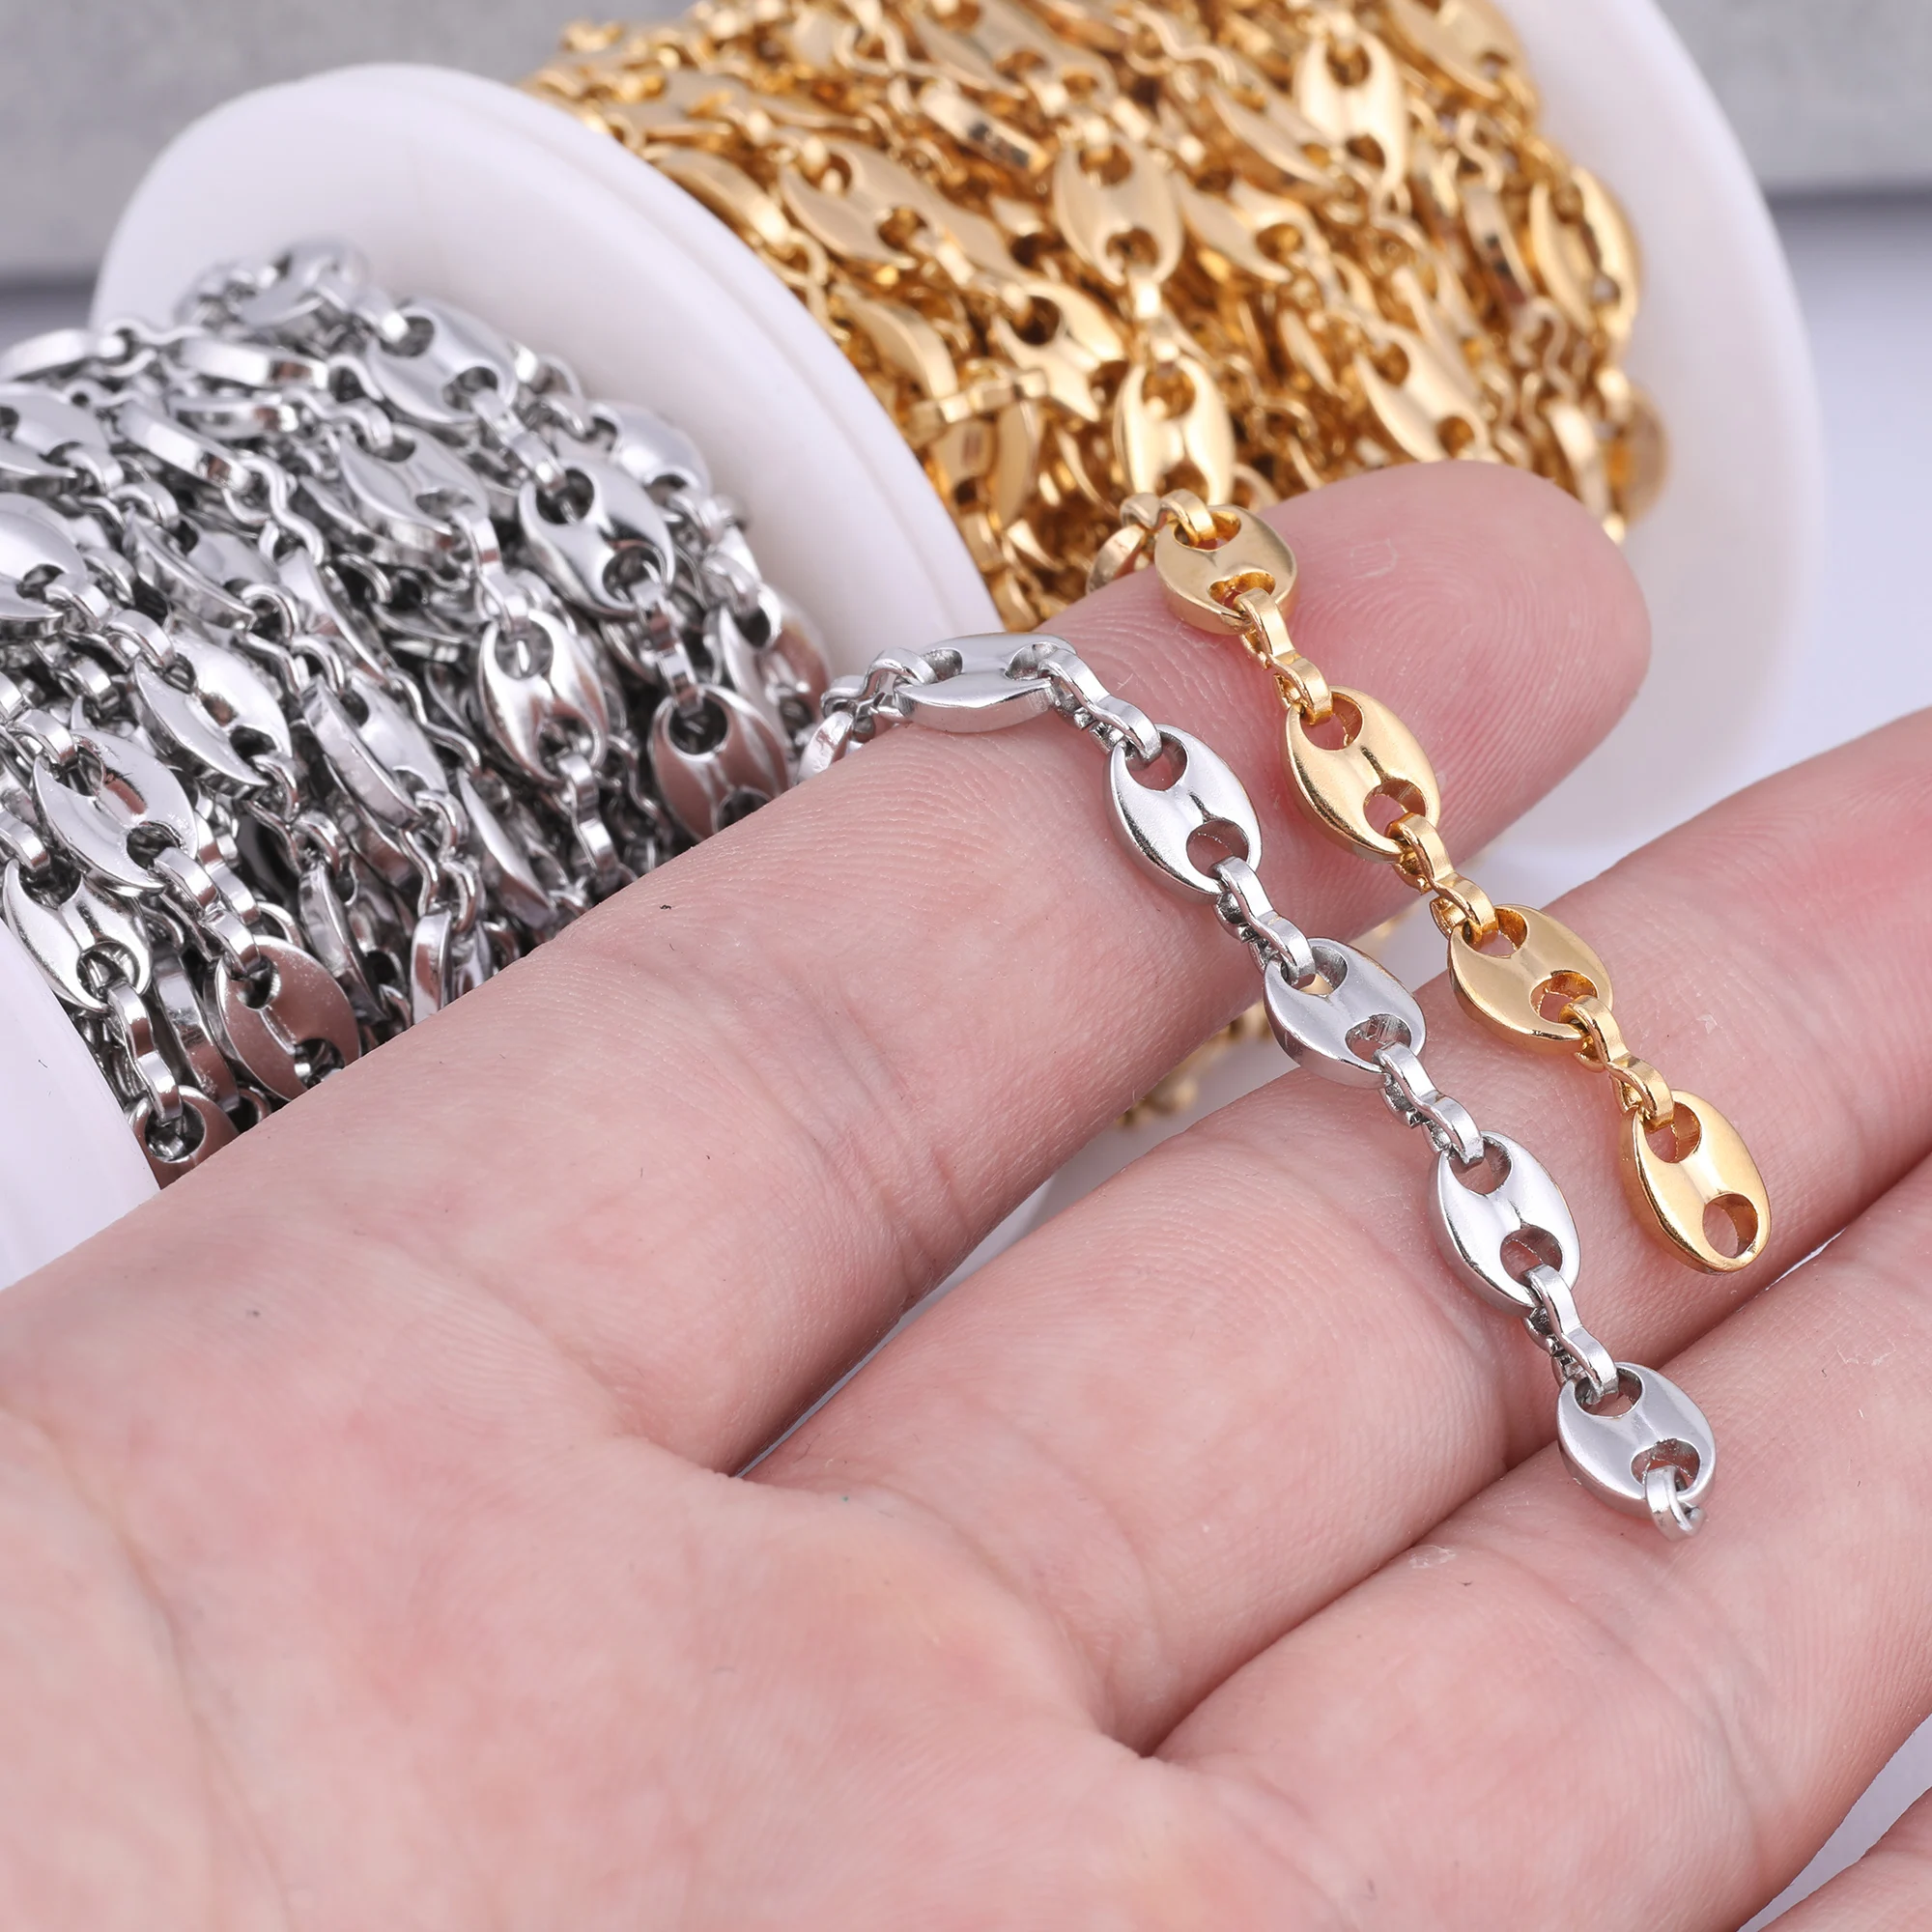 New Stainless Steel Chain For Jewelry Making Men Women Bracelets DIY Charm  Pig Nose Rolo Link Necklace Handmade Supplies Crafts